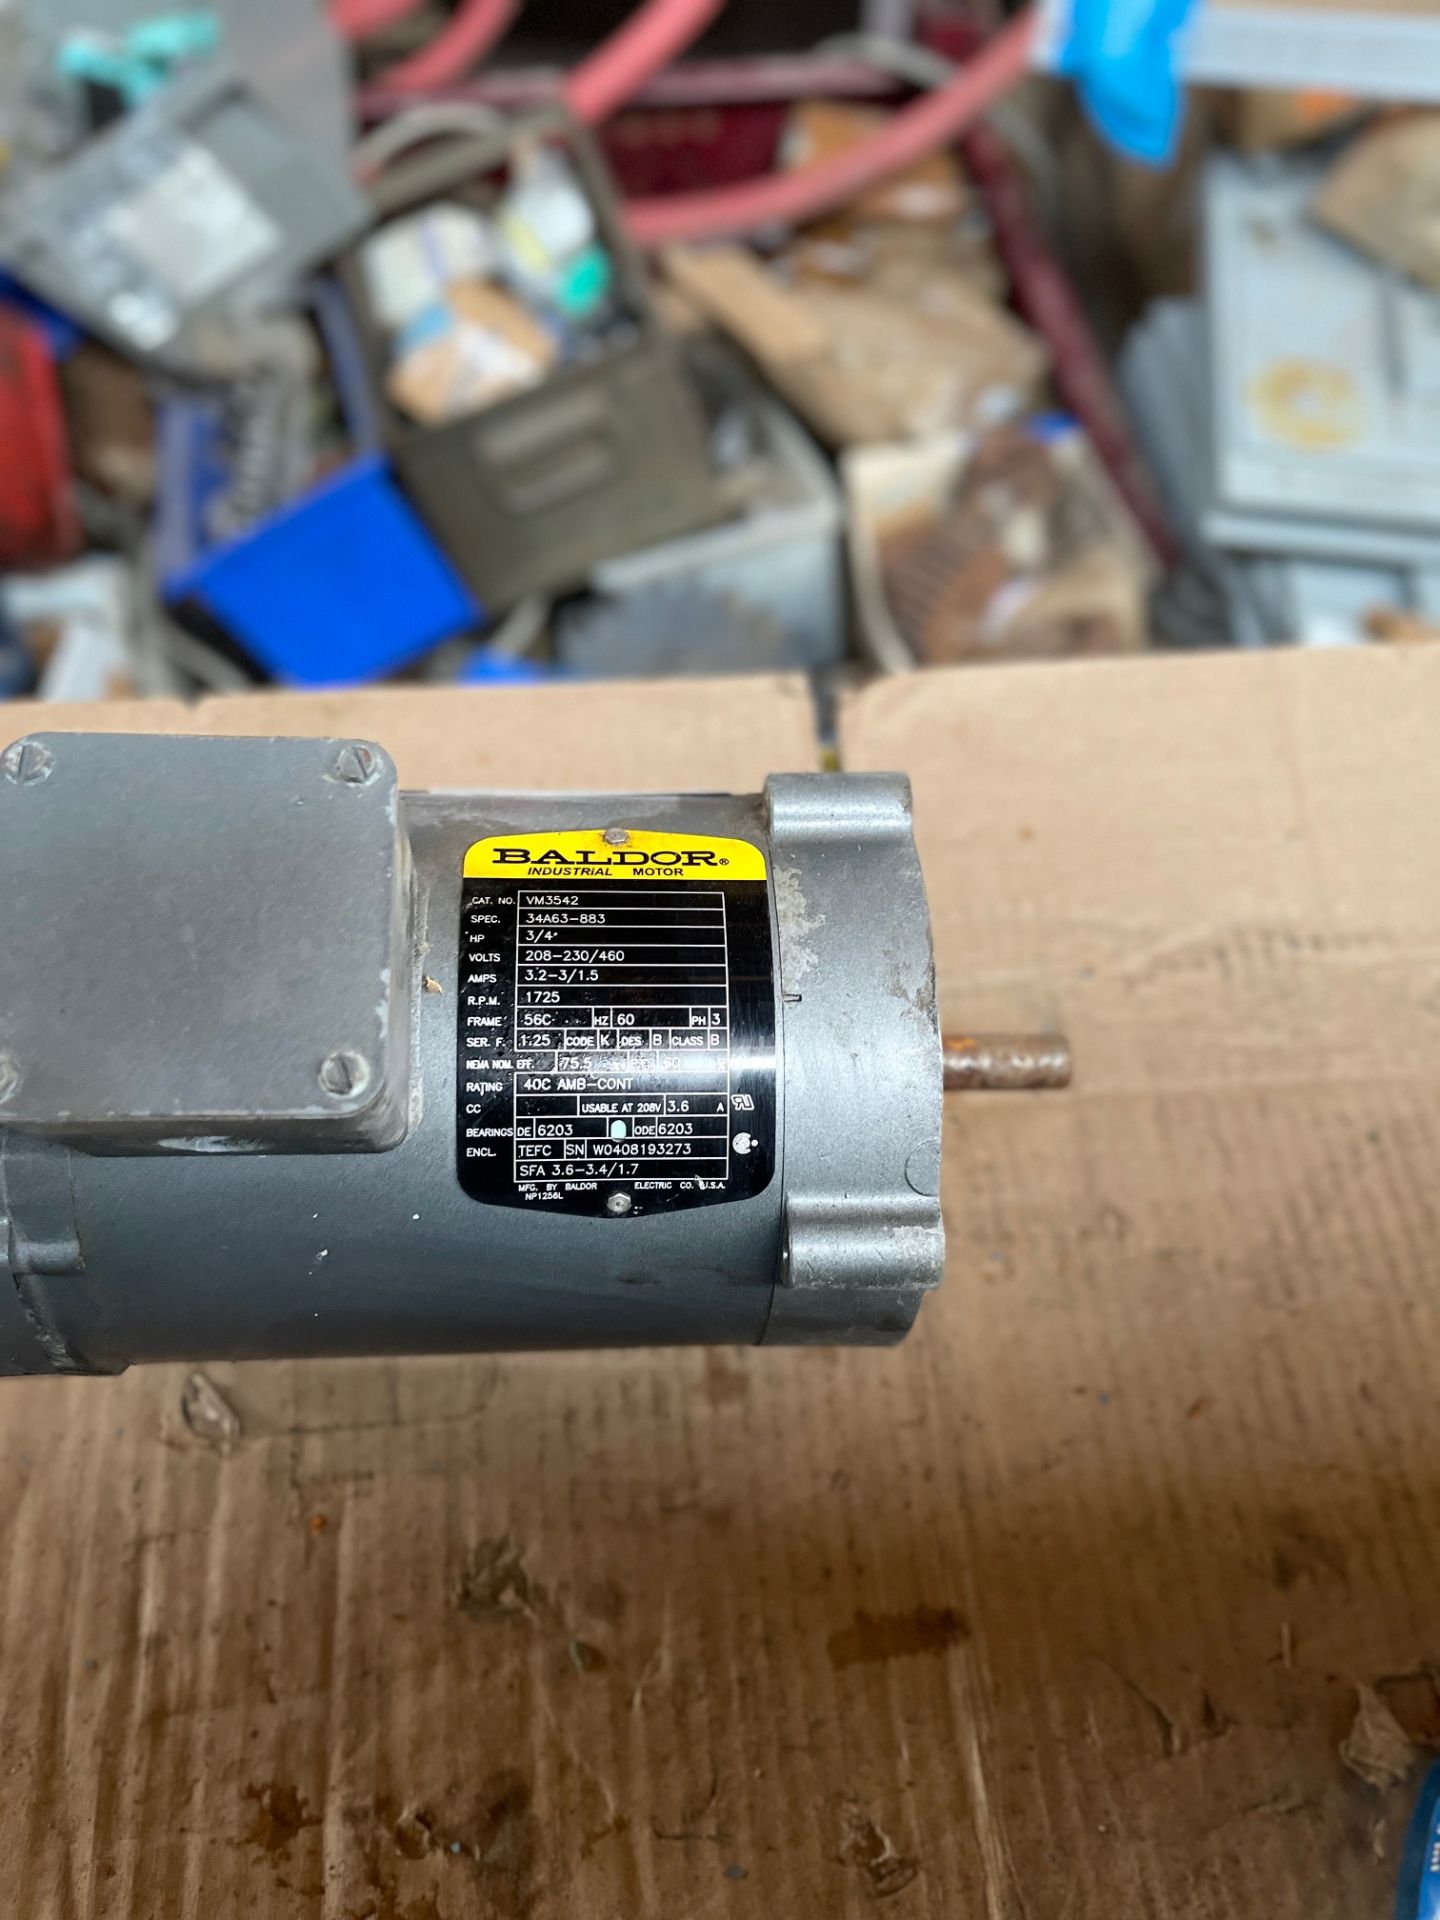 BALOR INDUSTRIAL MOTOR, RPM 1725, AMPS 3.2-3/1.5, VOLTS 208-230/460, HP 3/4 - Image 2 of 4